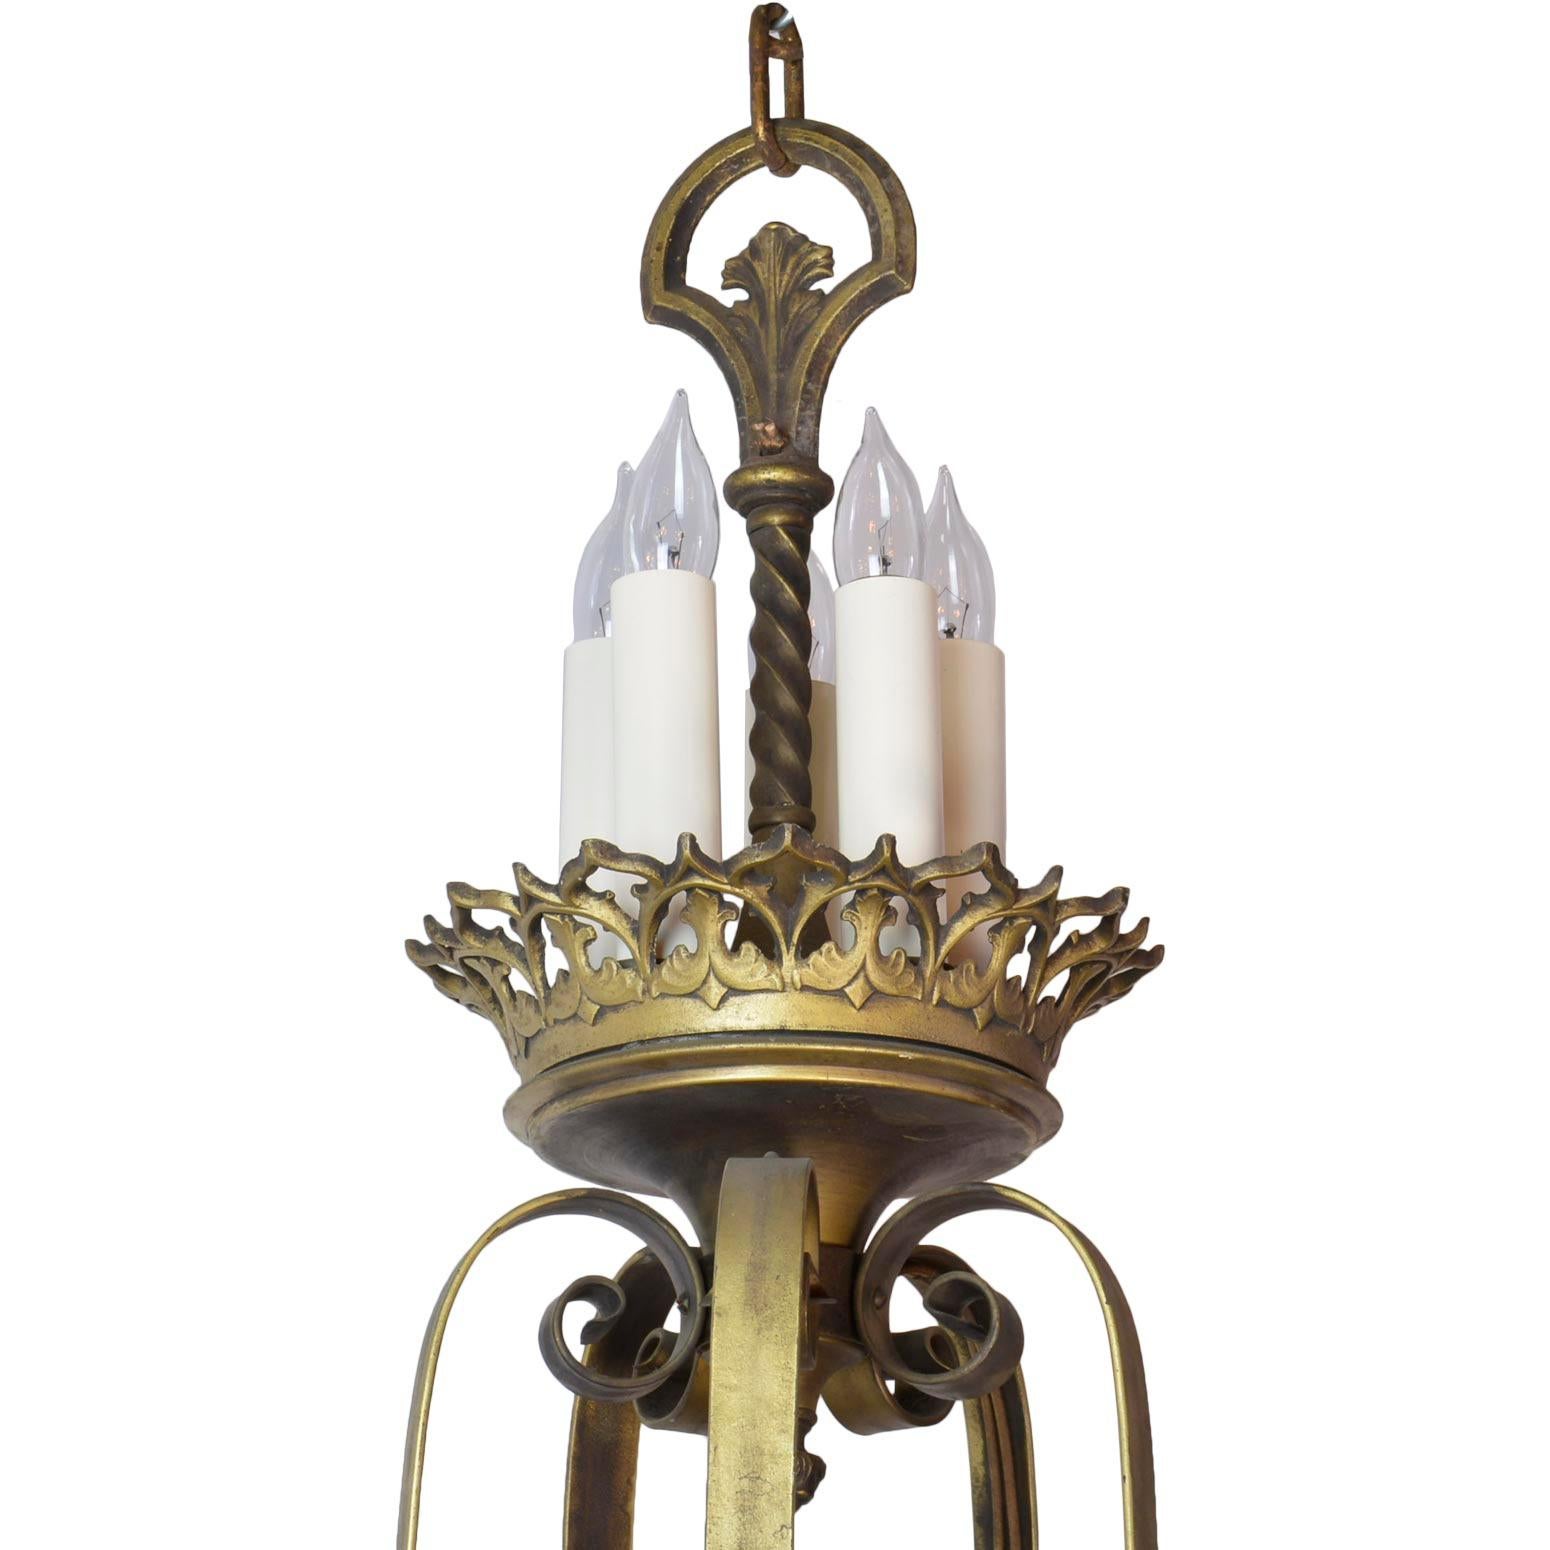 Gothic chandelier featuring quatrefoils, trefoils, acanthus leaf, scrollwork, and fleur-de-lis details, with 15 candles around the body and 5 candles at the top.

We find that early antique lighting was designed as objects of art and we treat each